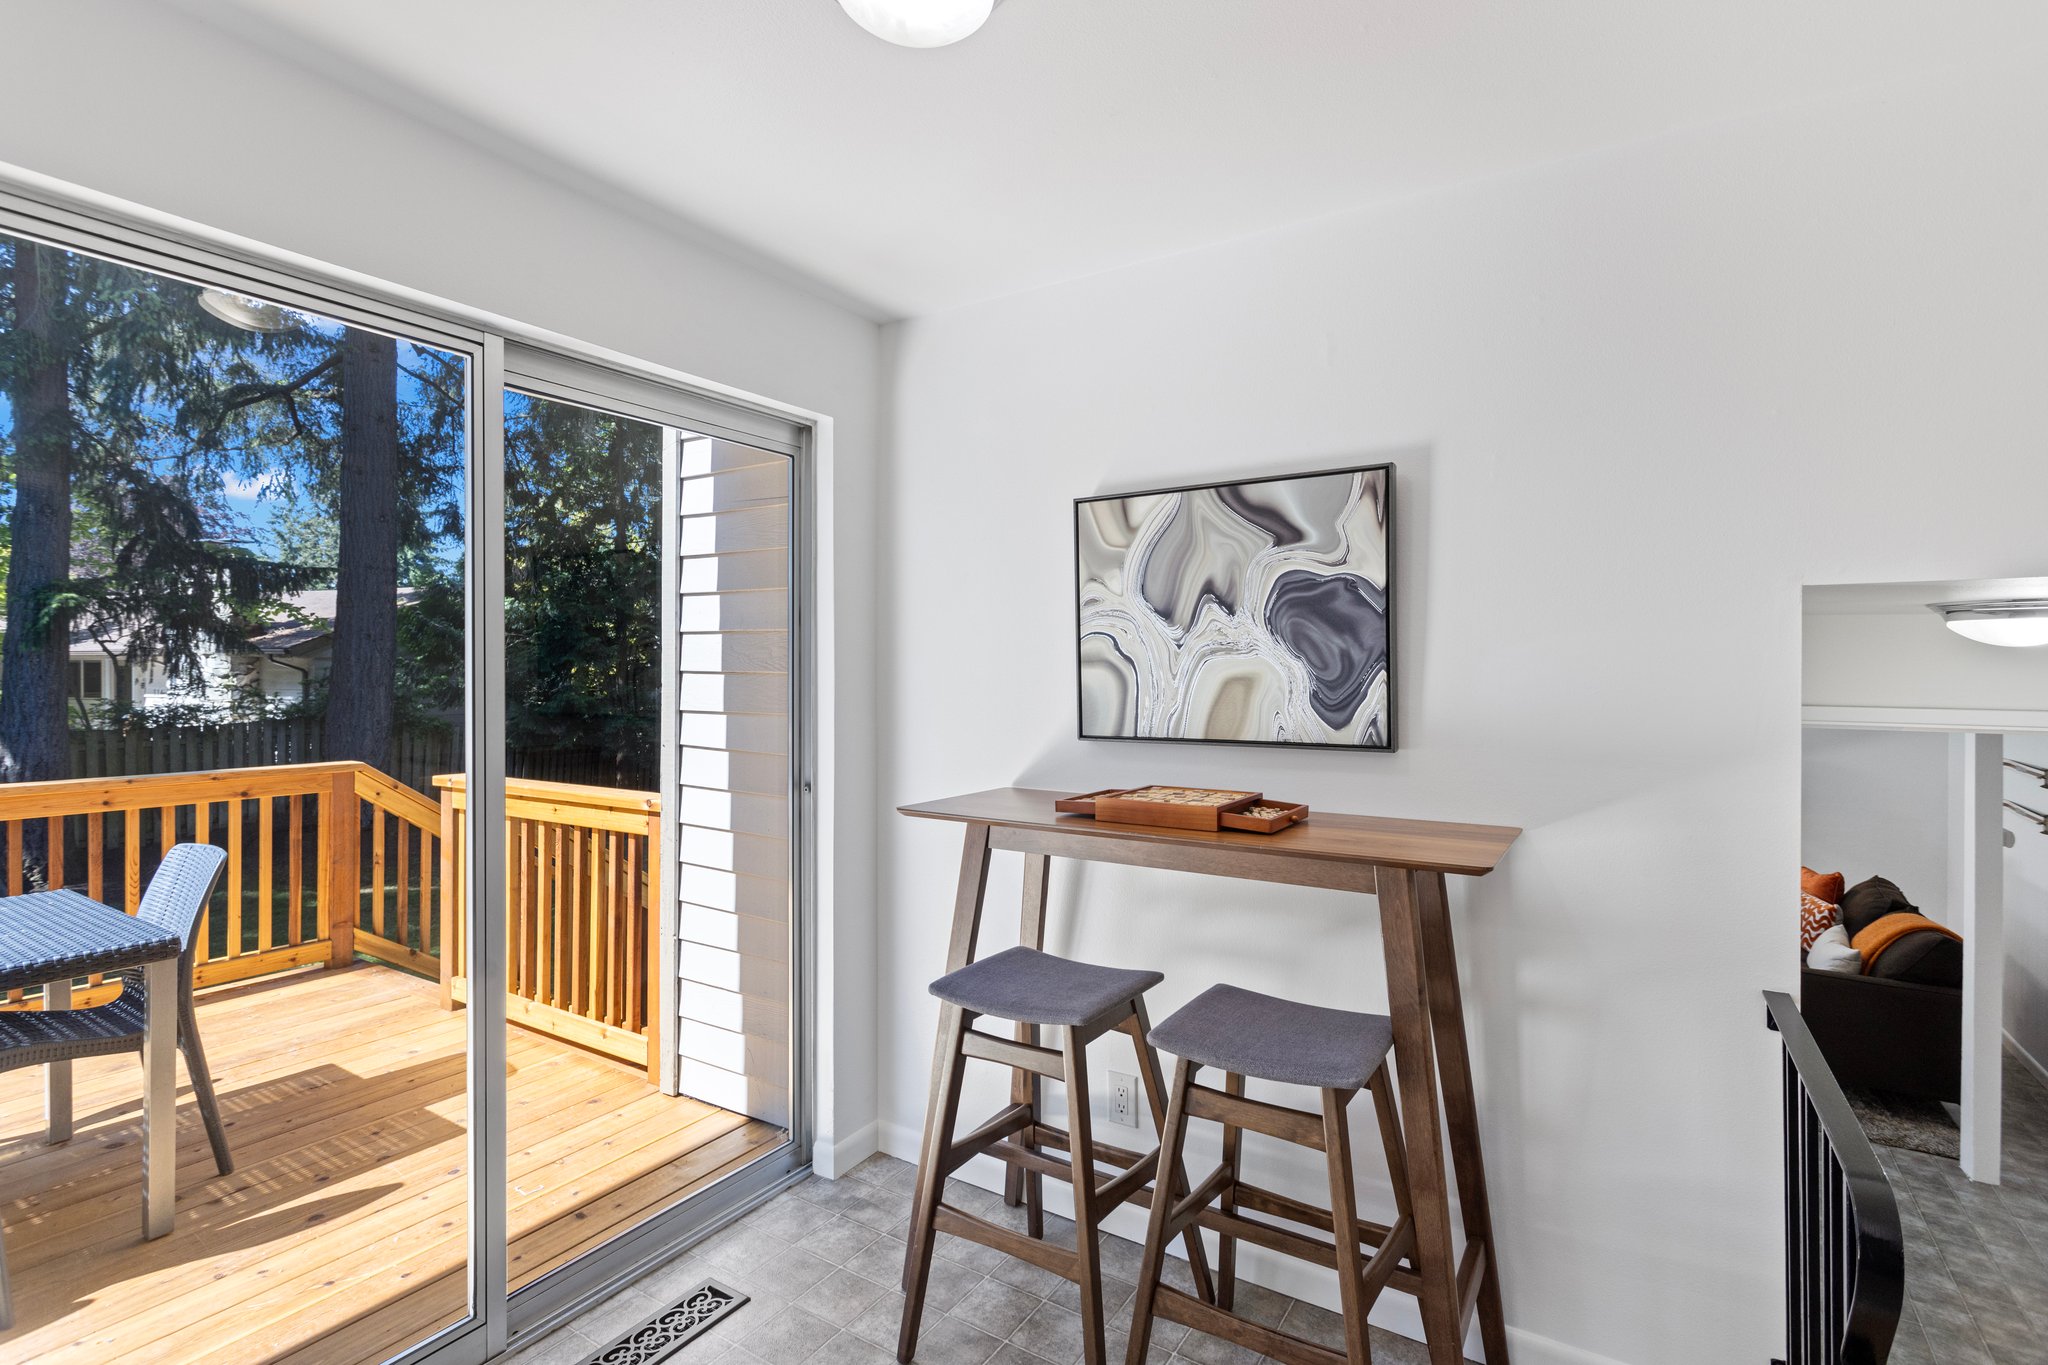 The sunny kitchen eating space connects with the family room and opens out to the deck.